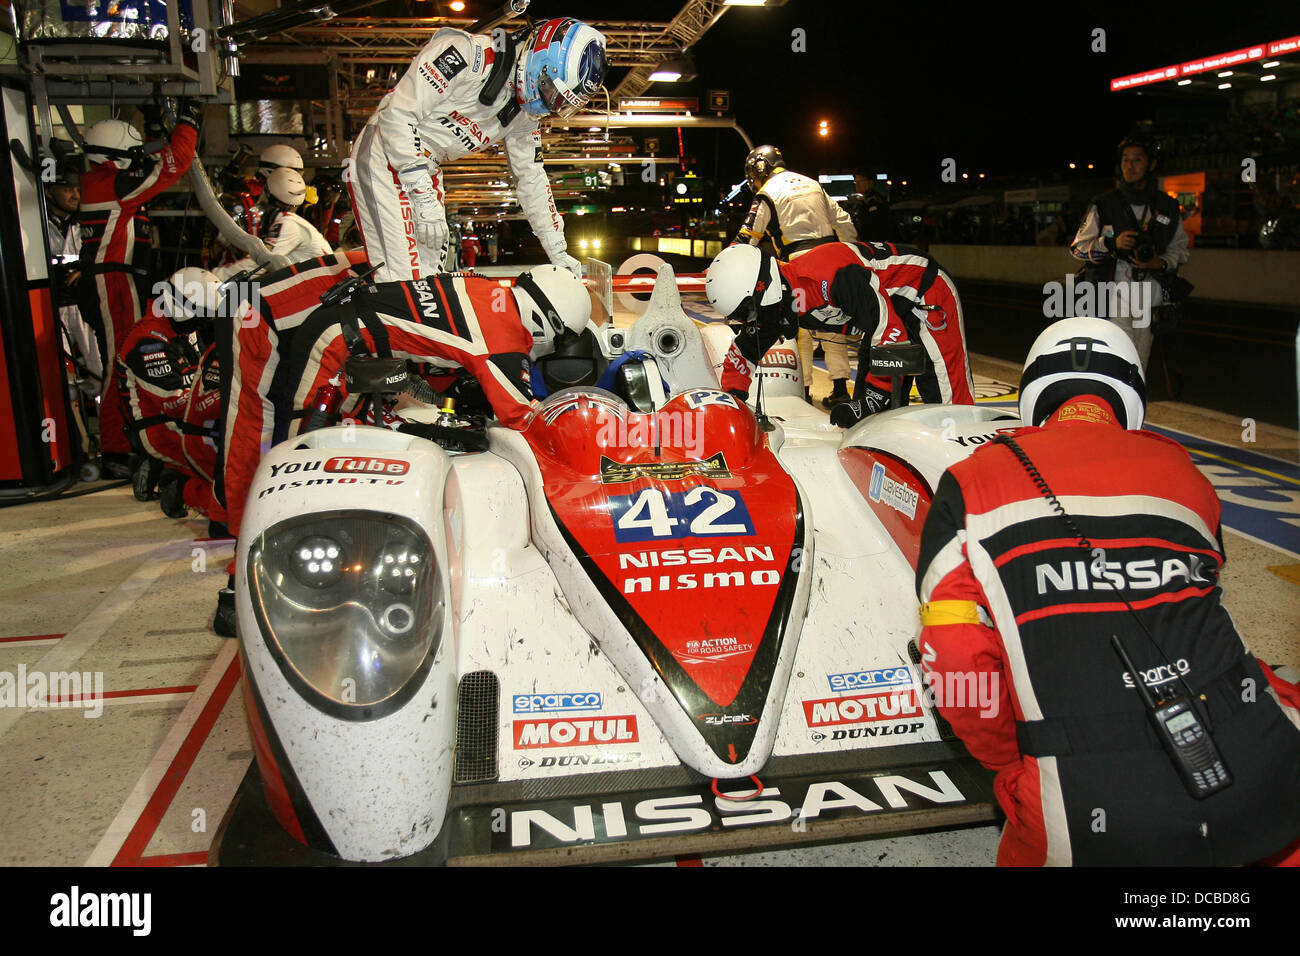 Nissan pit stop at the 2013 Le Mans 24 Hours. Stock Photo